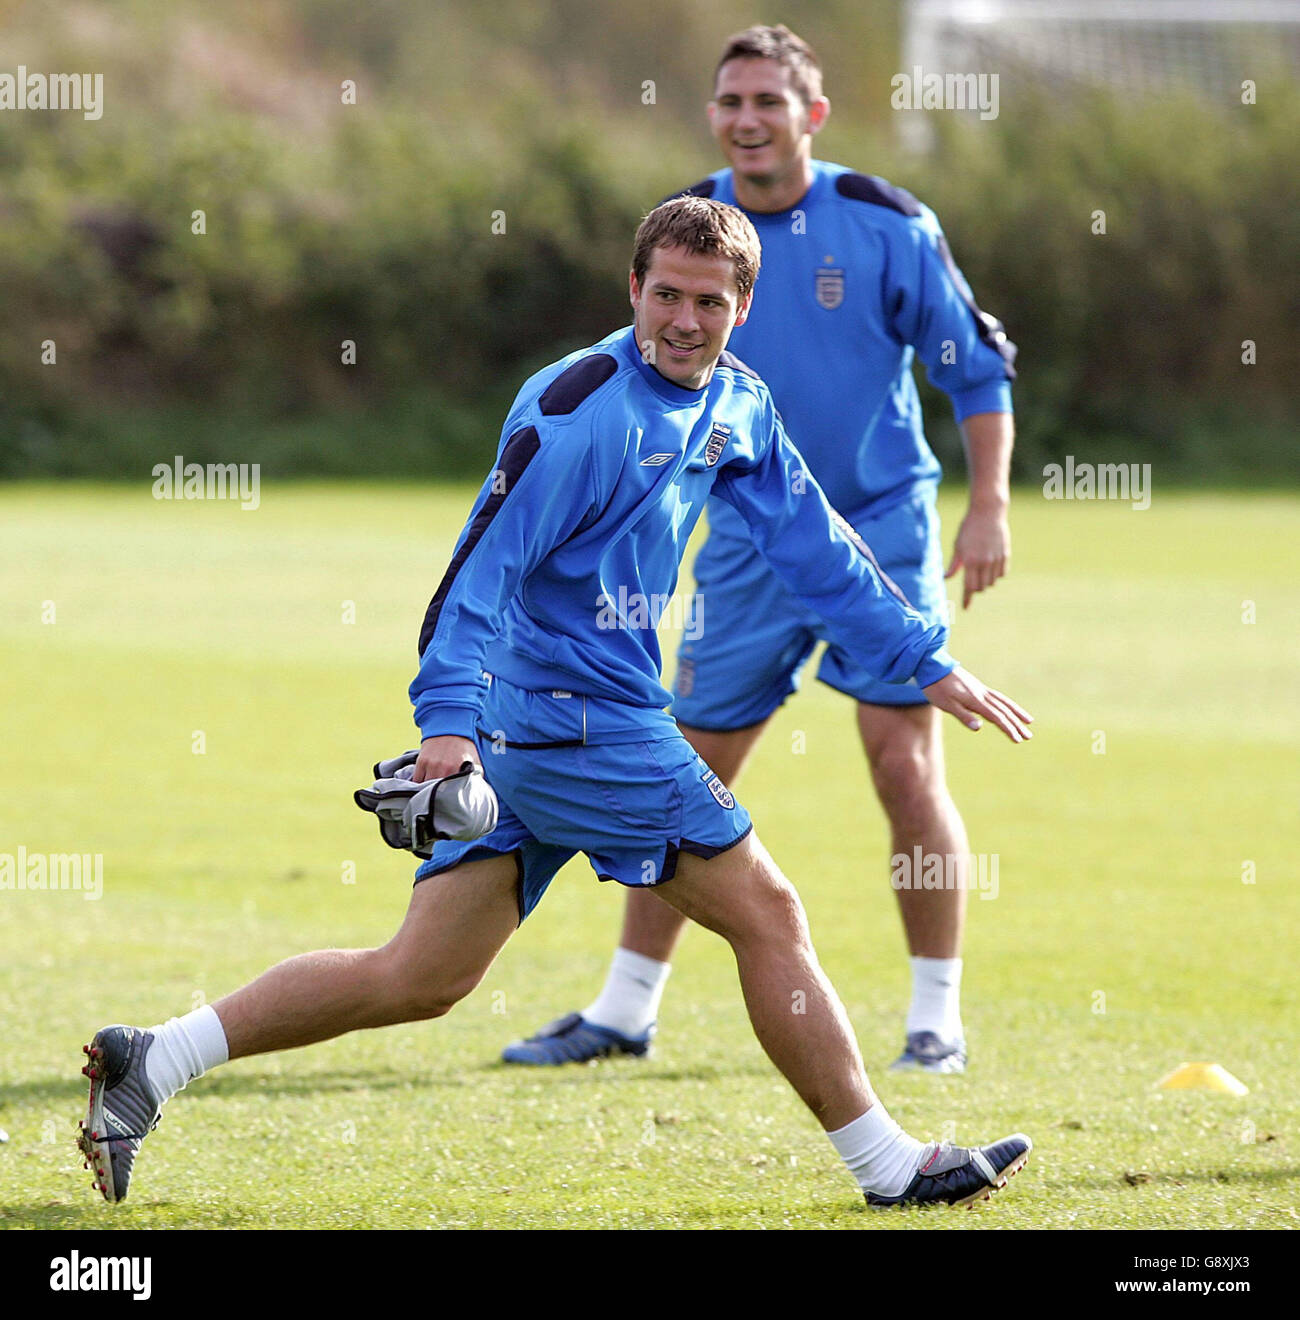 England's Michael Owen and Frank Lampard during a training session at Carrington training ground, Manchester, Monday October 10, 2005, ahead of their World Cup qualifying match against Poland on Wednesday. PRESS ASSOCIATION Photo. Photo credit should read: Martin Rickett/PA. Stock Photo